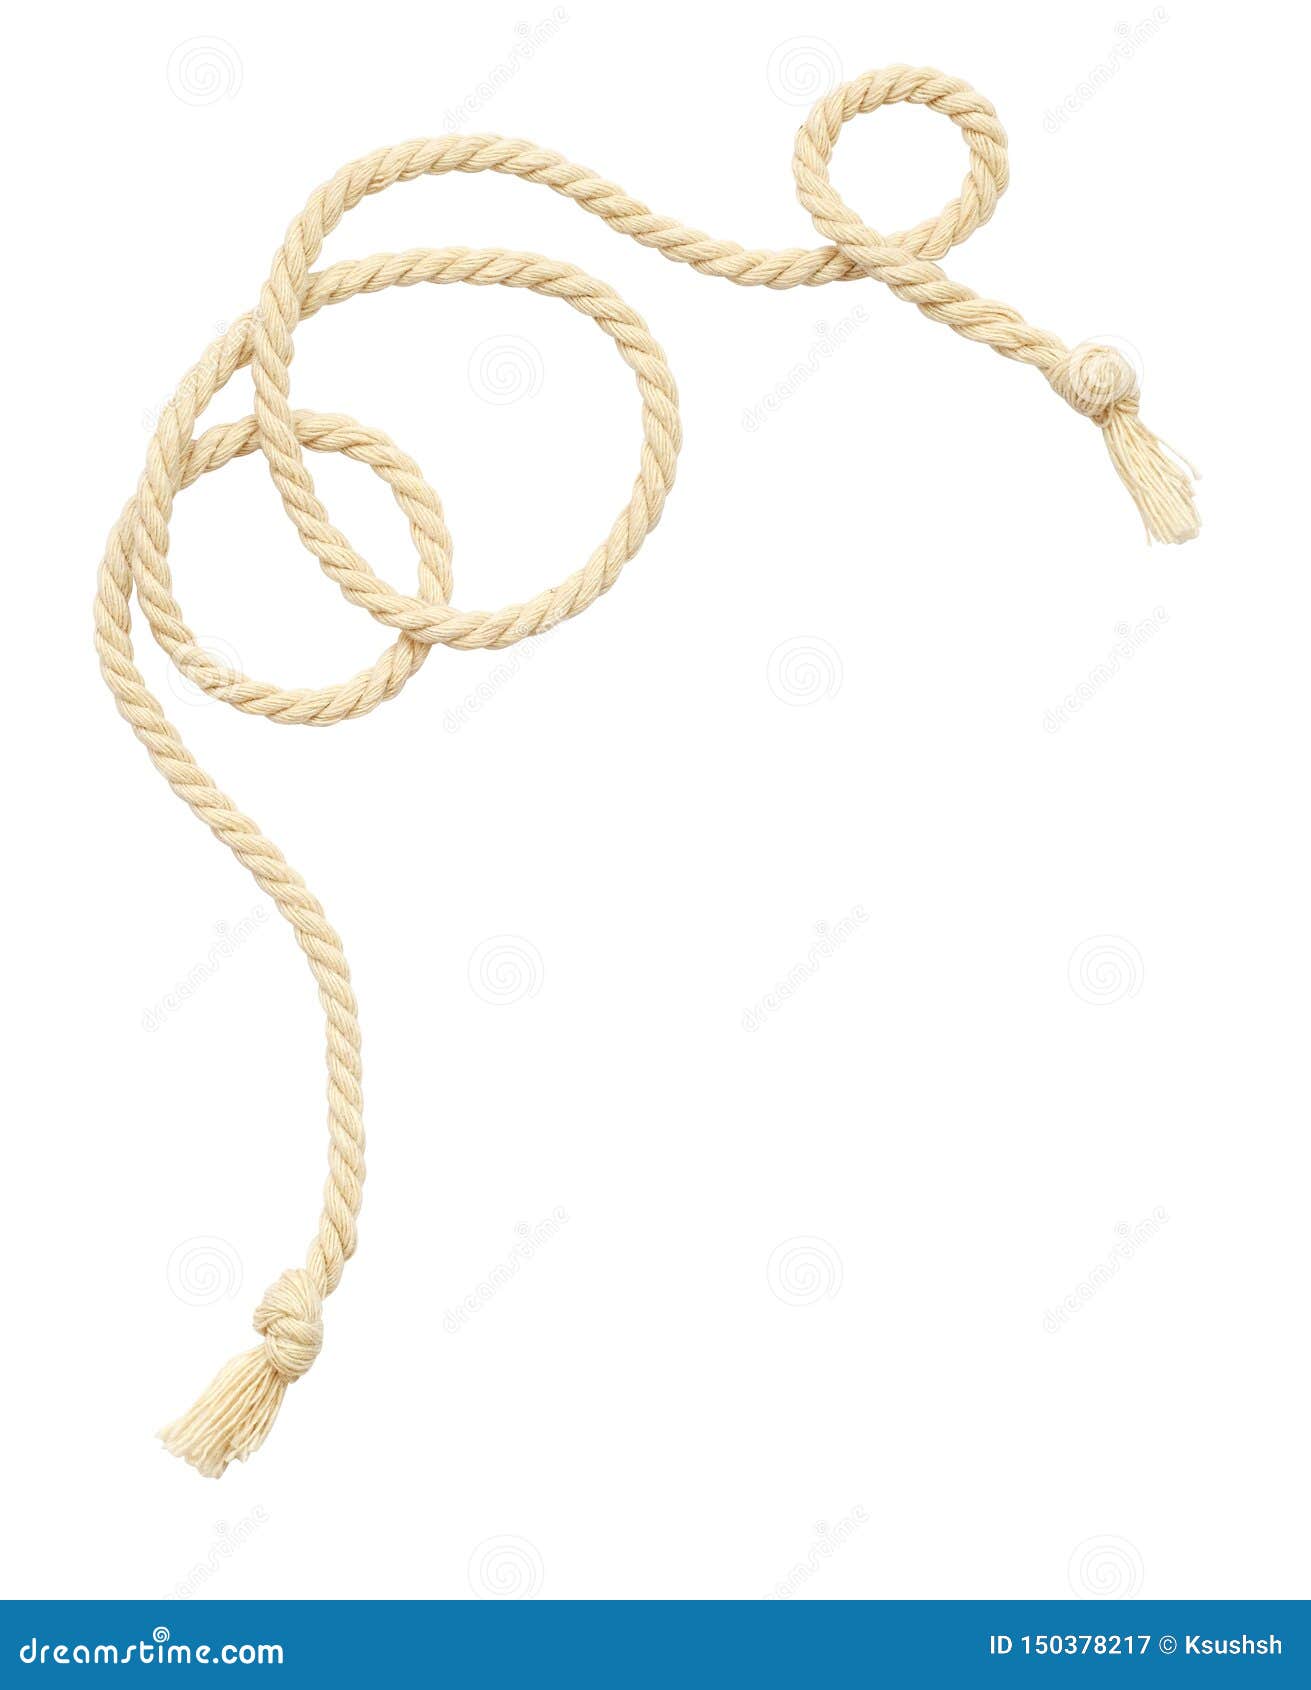 Rope PNG Image  Rope, Texture, Tiles texture